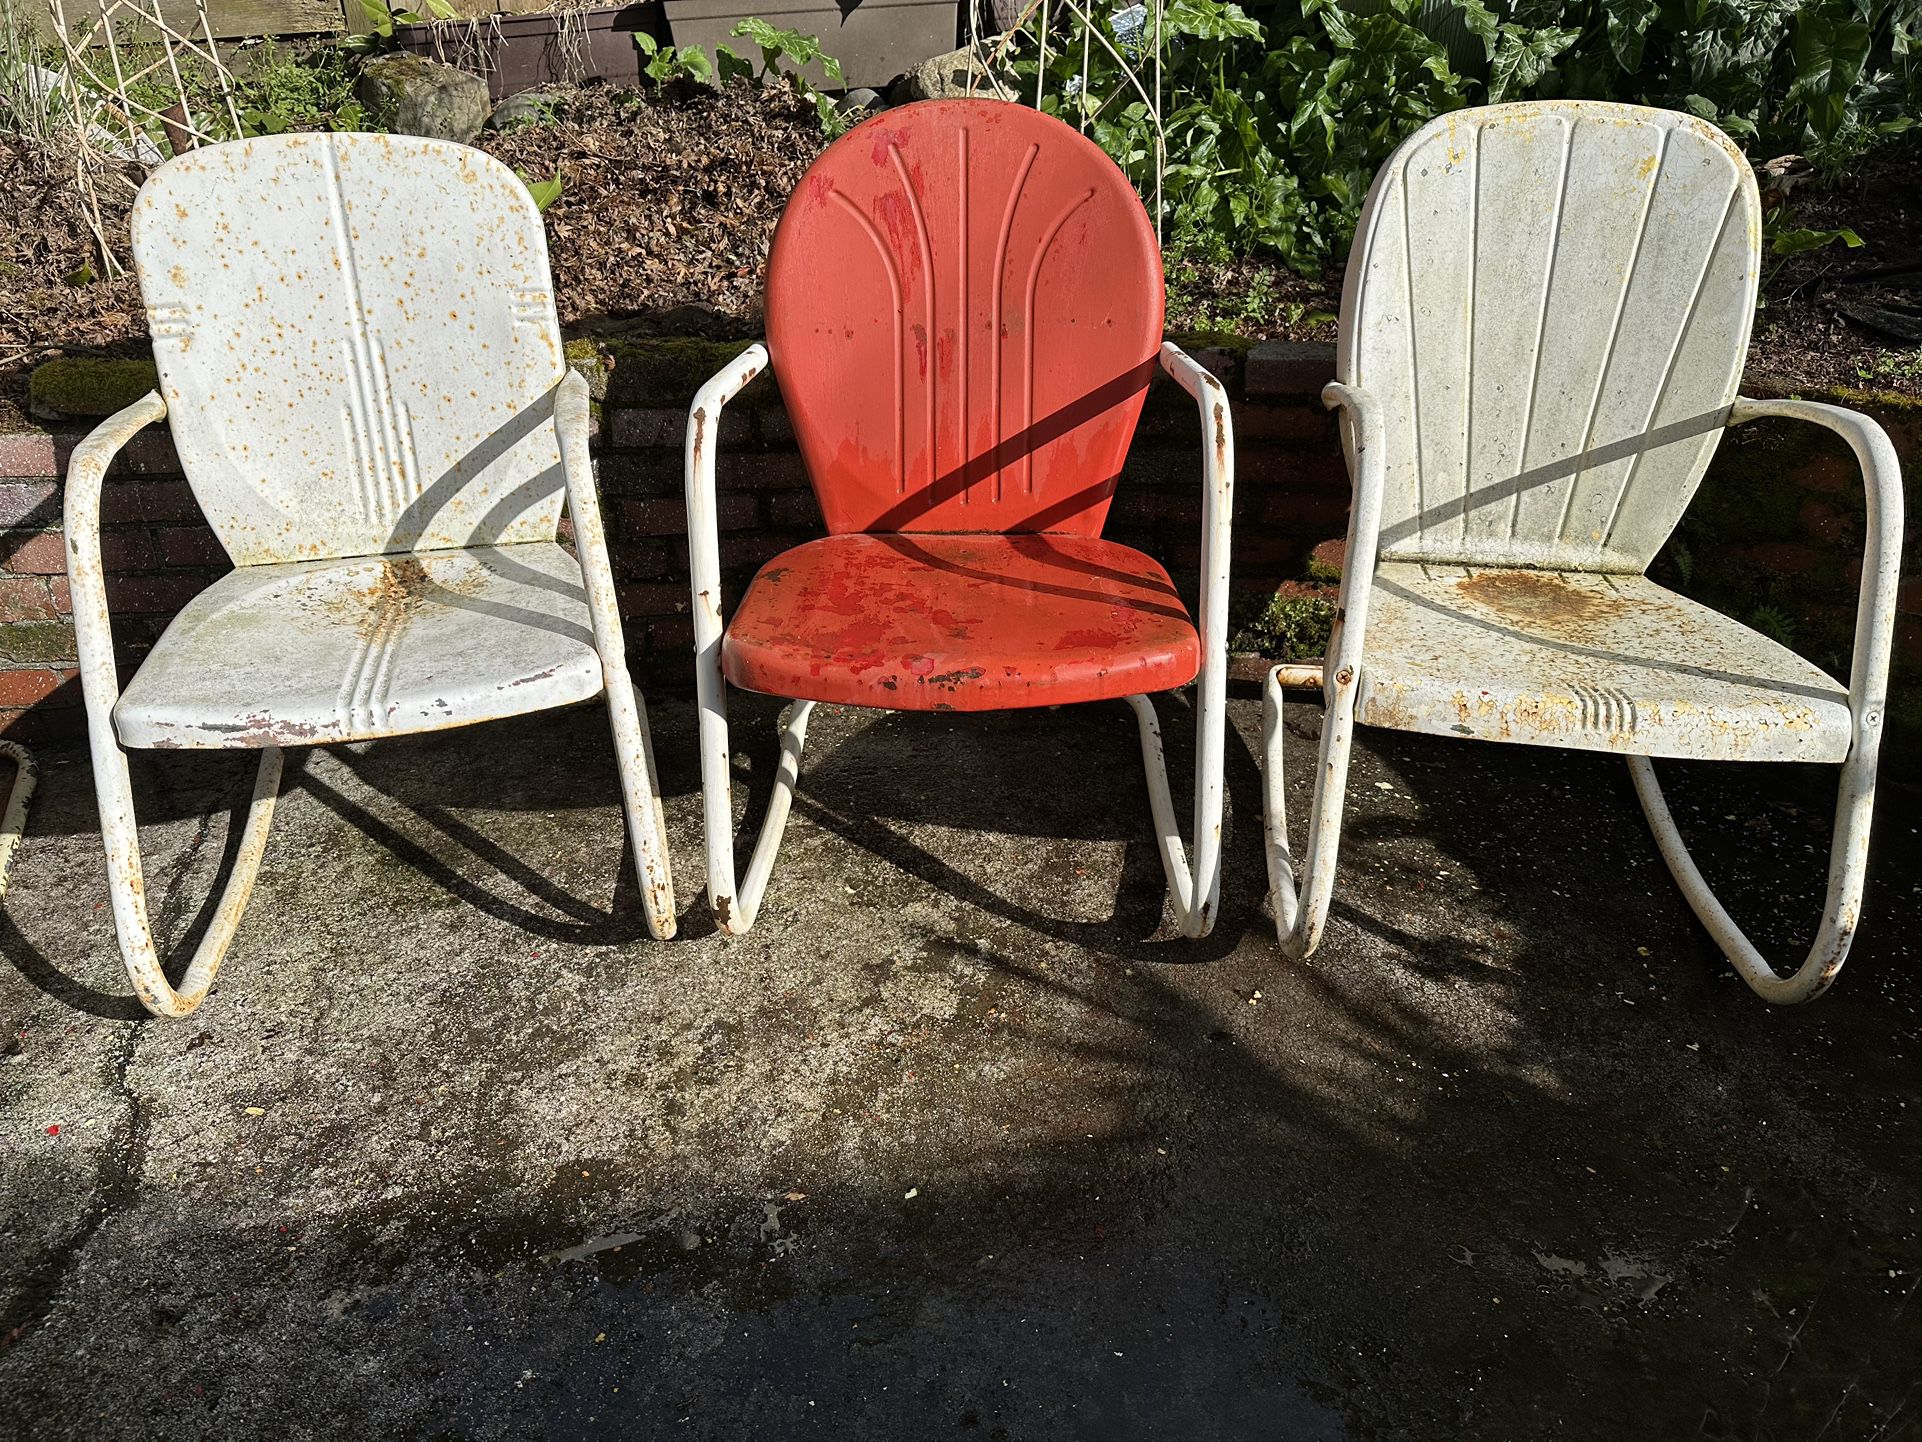 Authentic Vintage Midcentury 1950’s Outdoor Metal Shell Rockers/Chairs